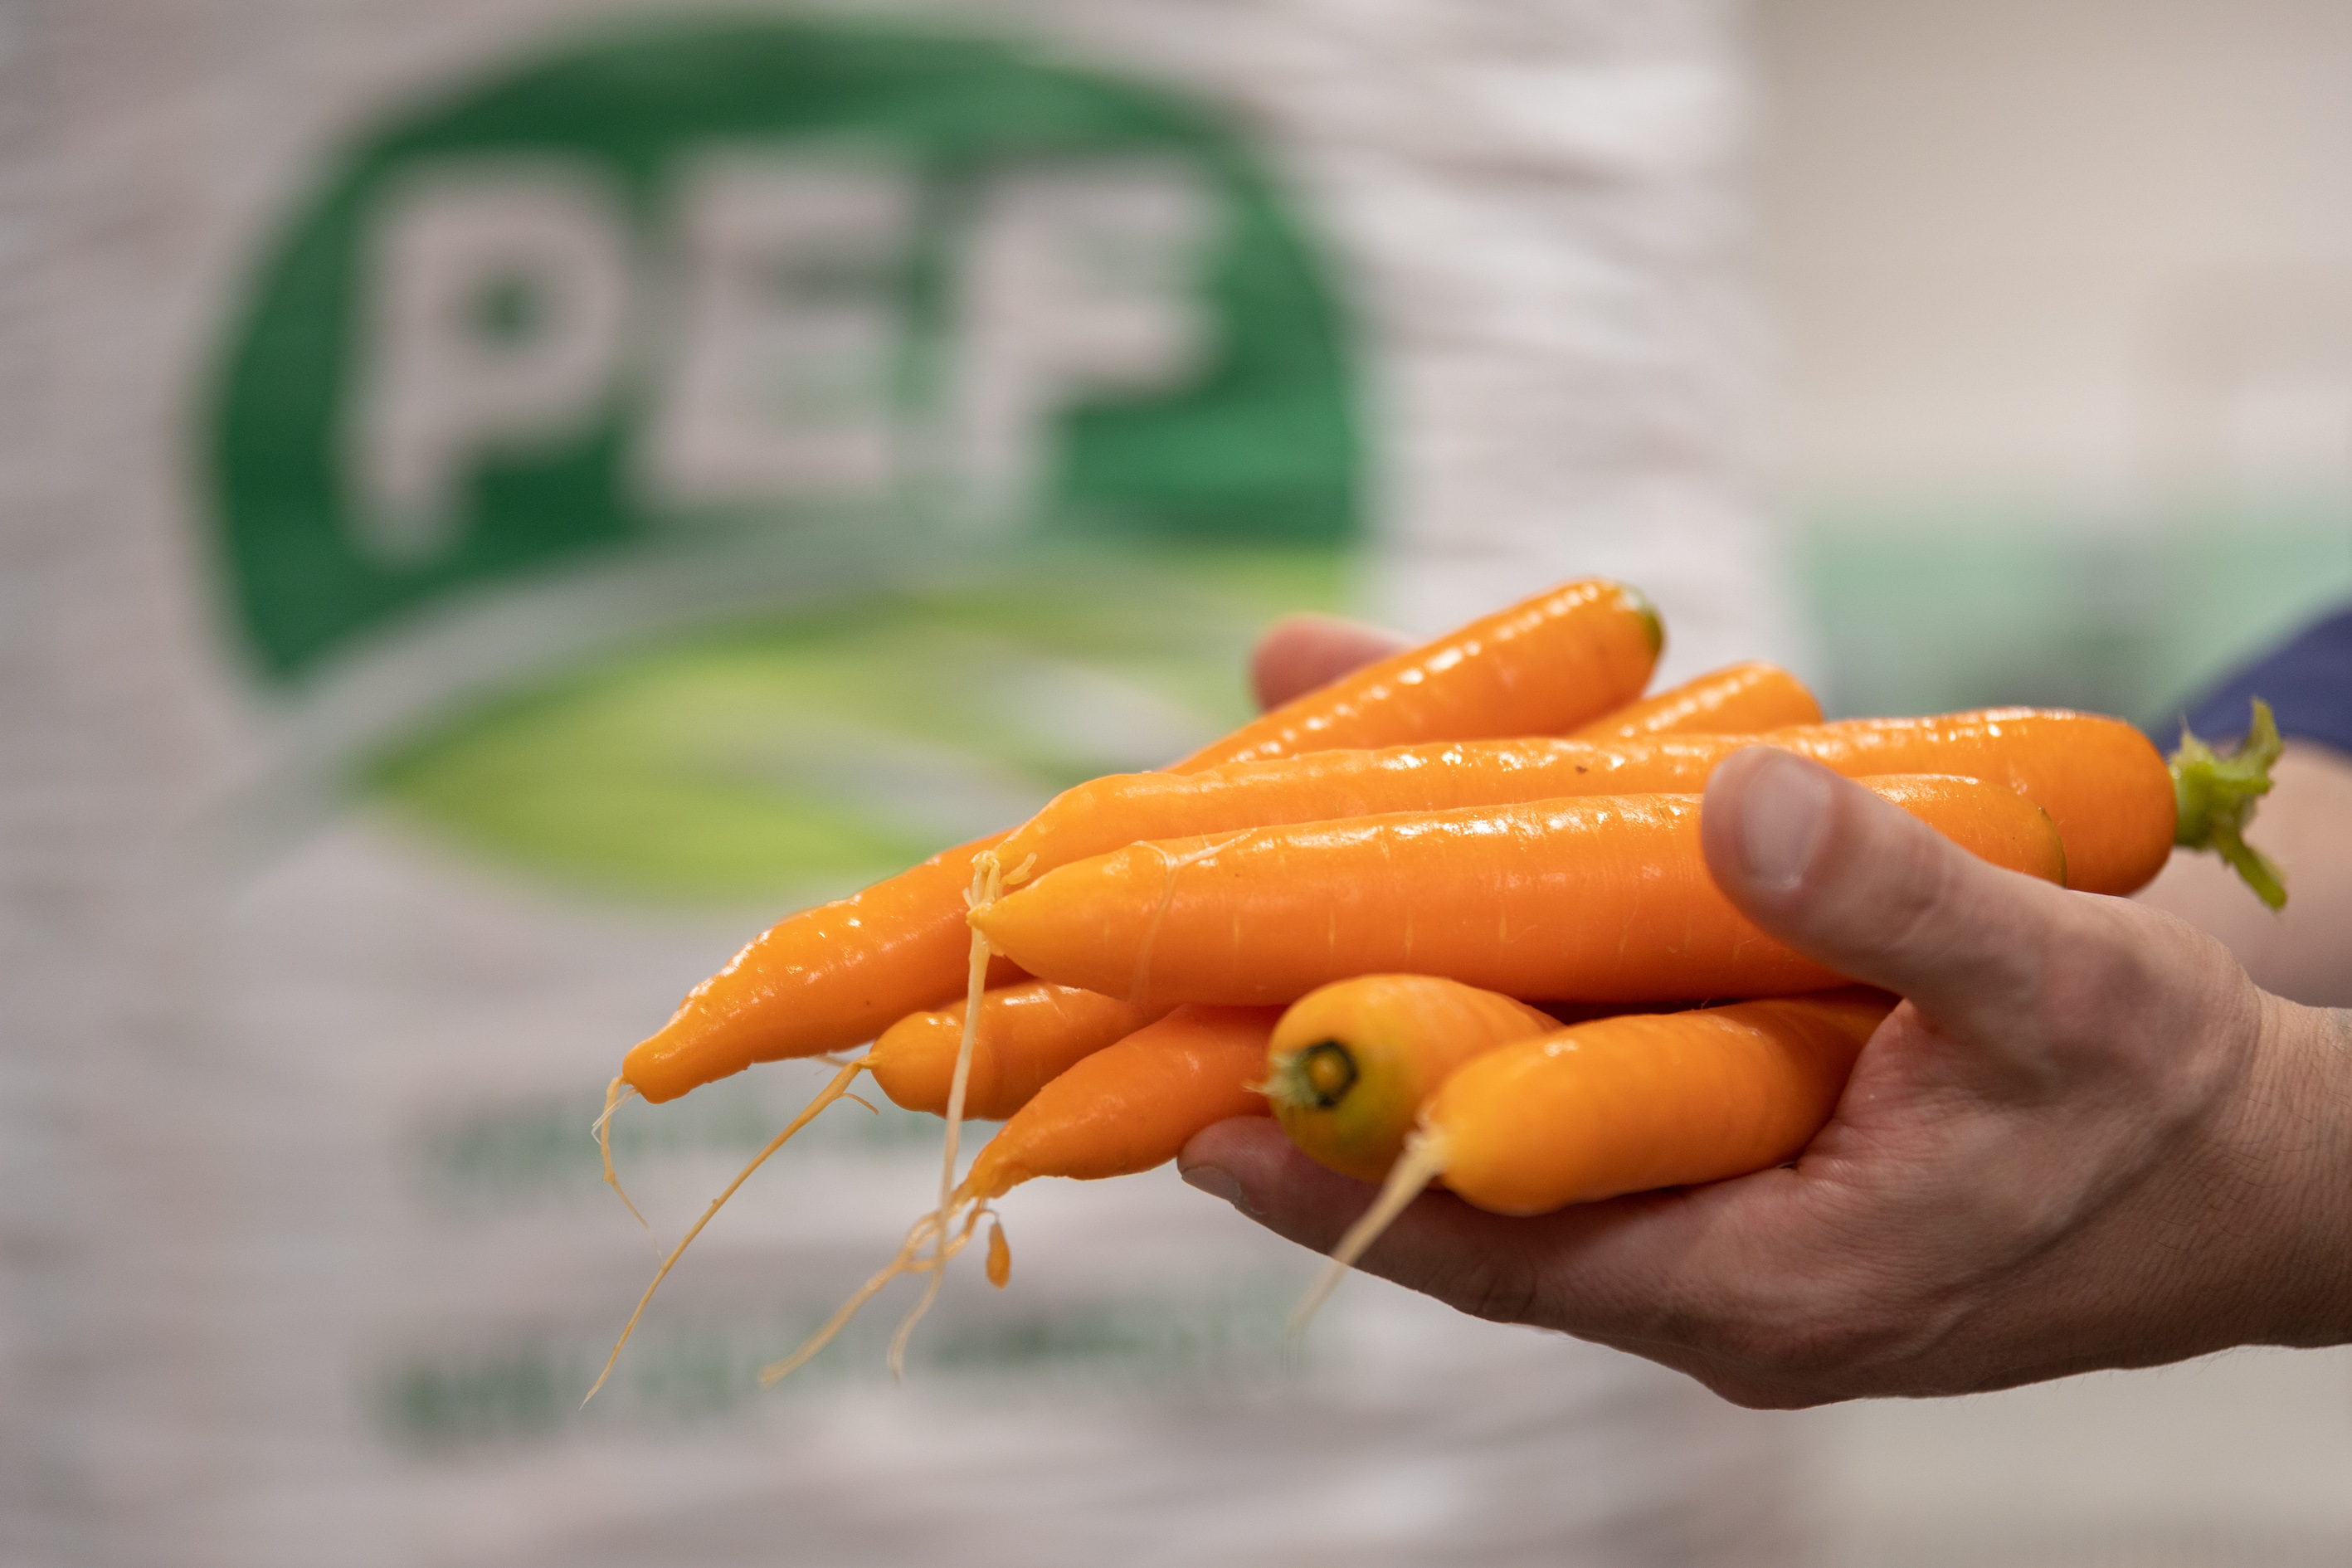 THE SELECTION OF IGP ISPICA CARROTS GOES THROUGH THE DIGITAL PLATFORM TOMRA INSIGHT